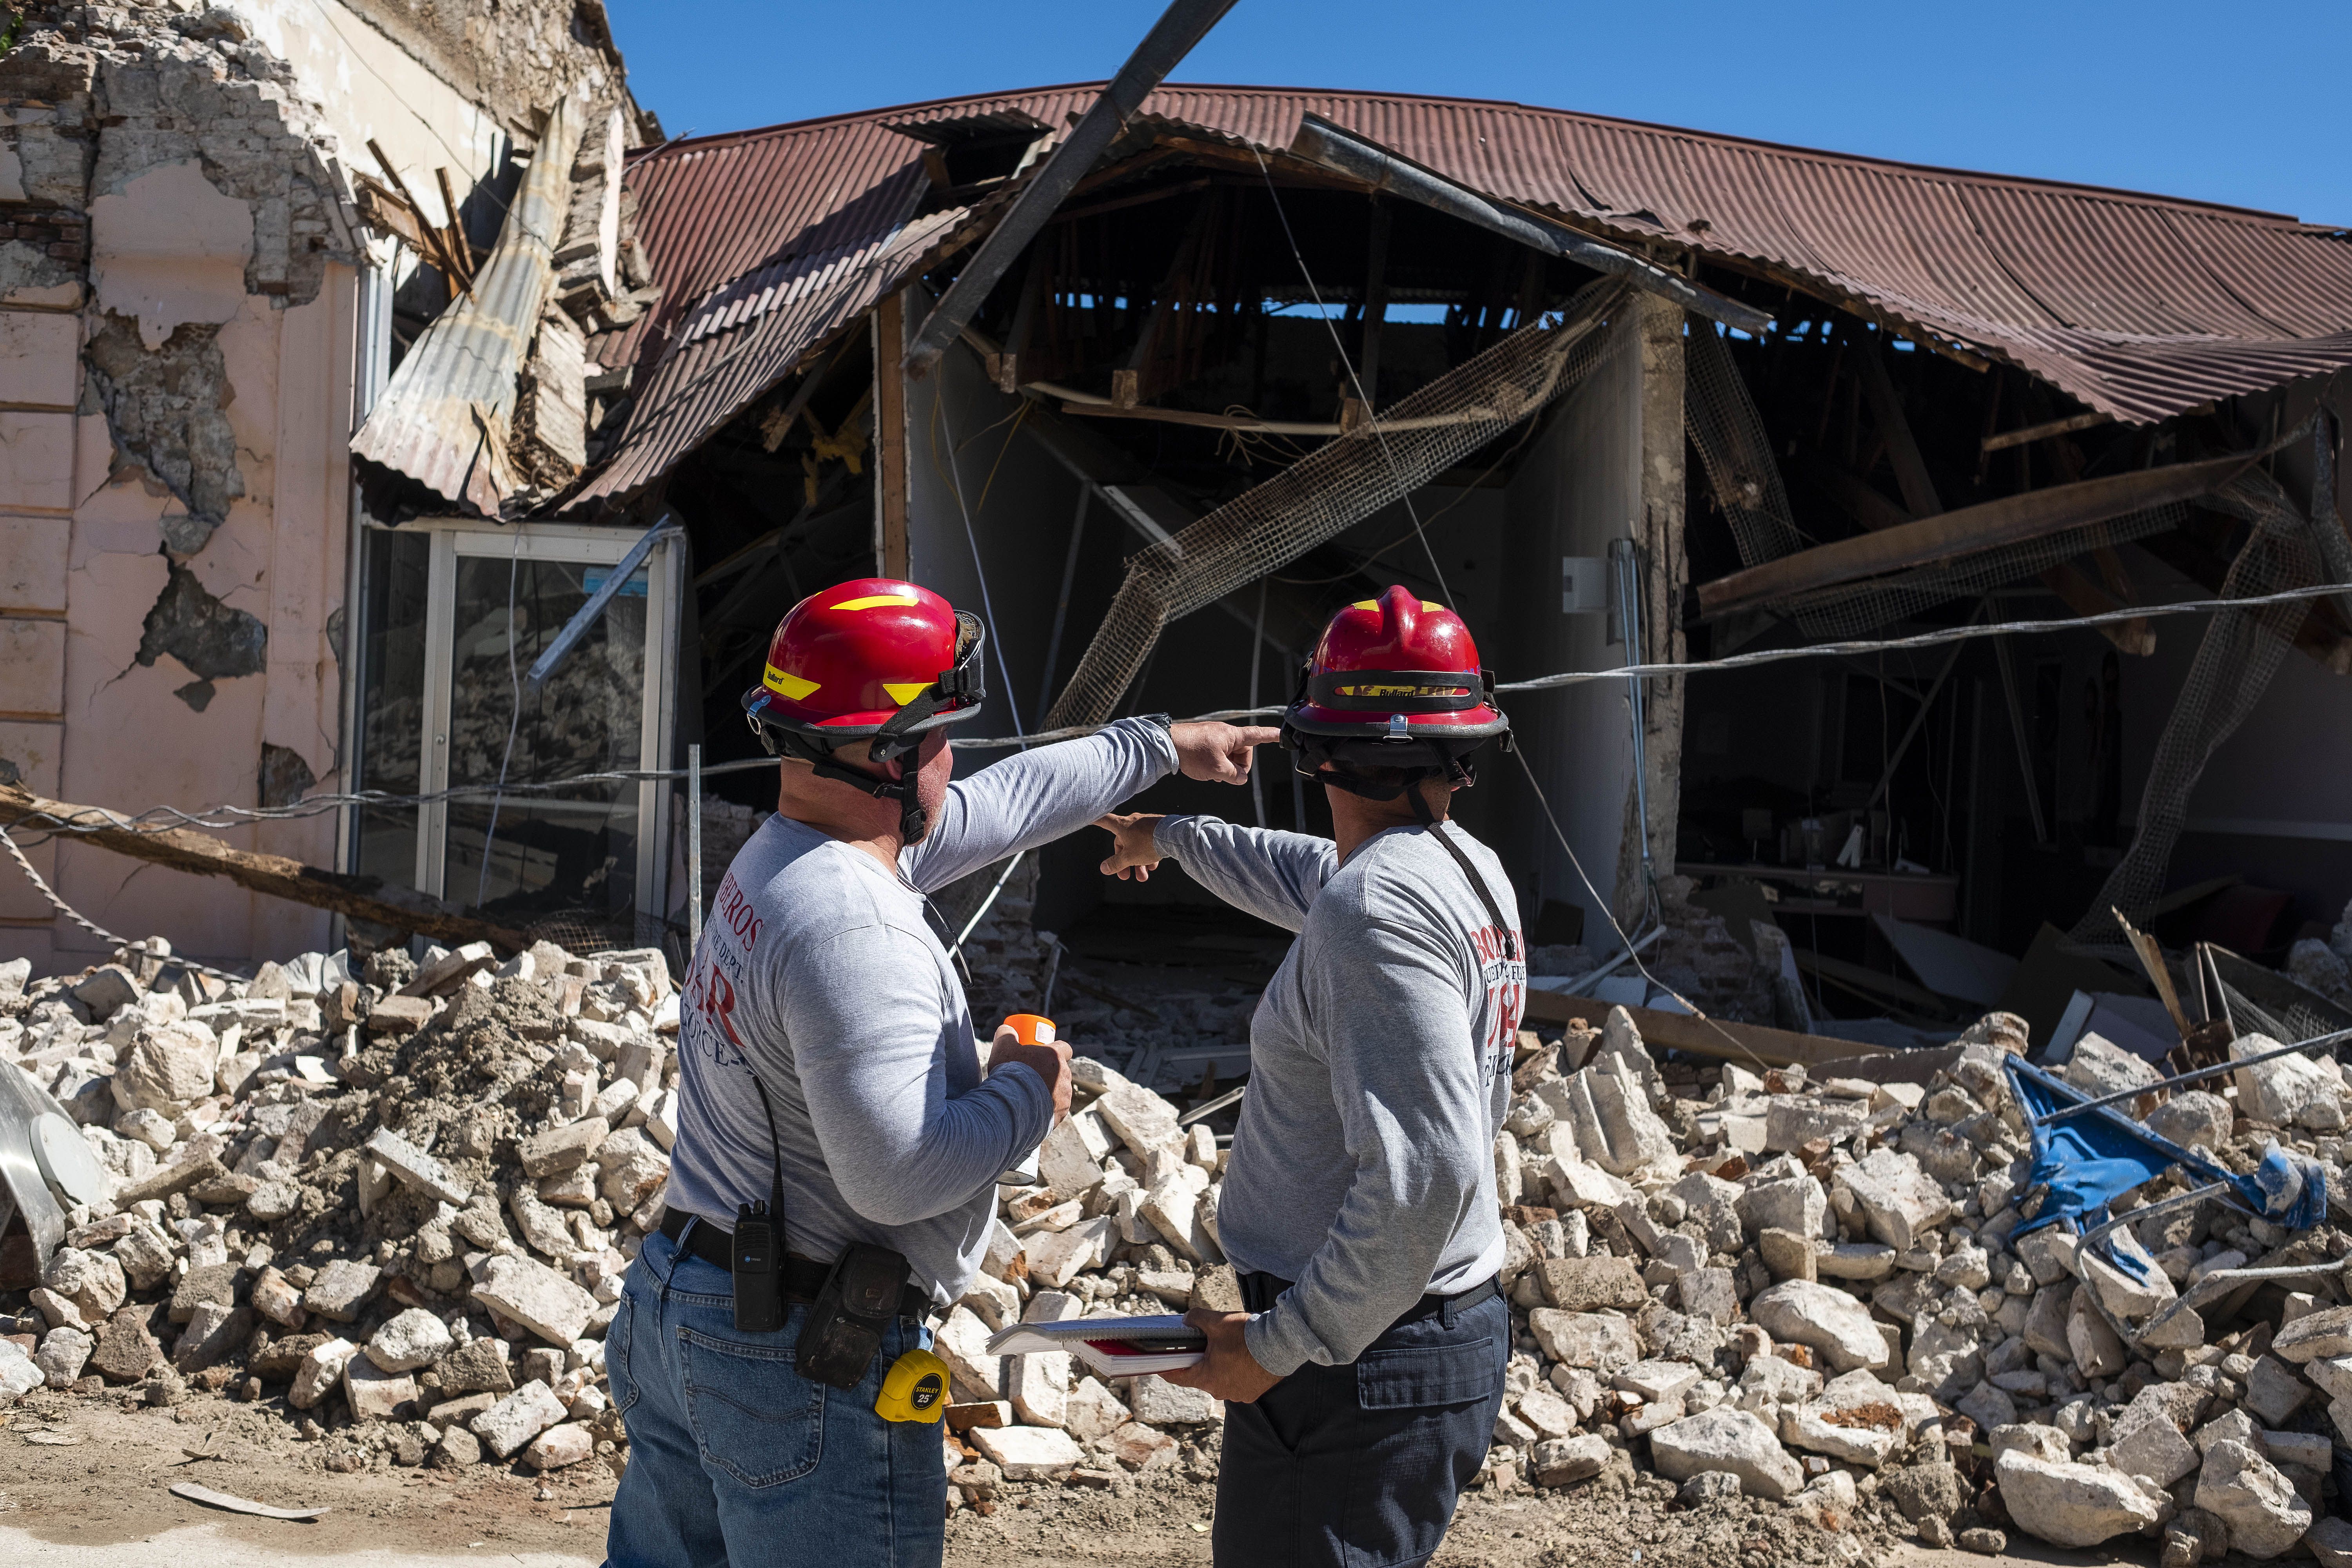  Two firemen survey a collapsed building after an earthquake hit the island in Guanica, Puerto Rico